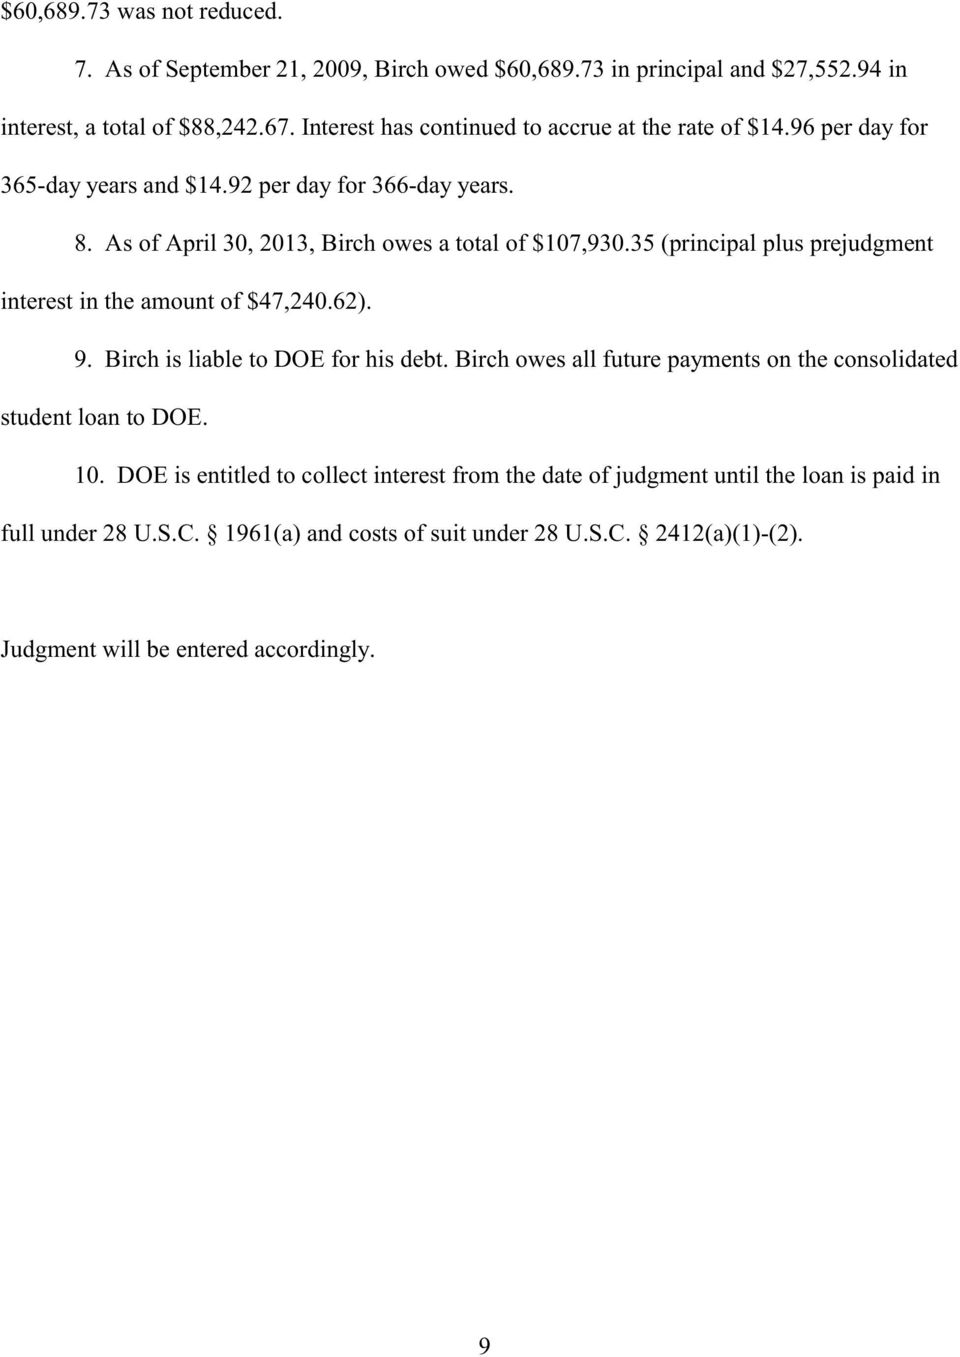 35 (principal plus prejudgment interest in the amount of $47,240.62). 9. Birch is liable to DOE for his debt.